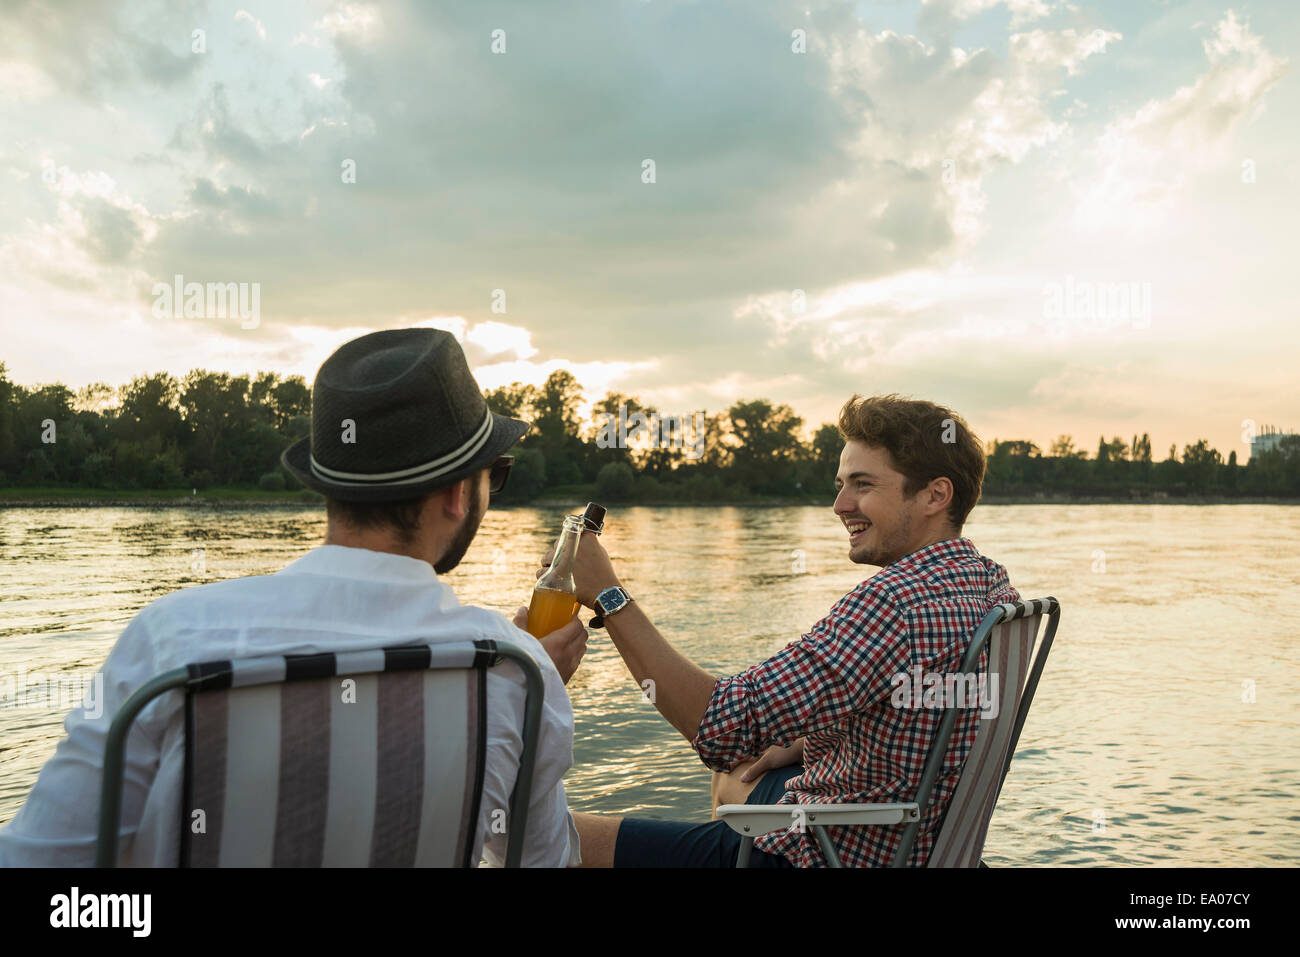 Young Men toasting with beer bottles by lake Banque D'Images